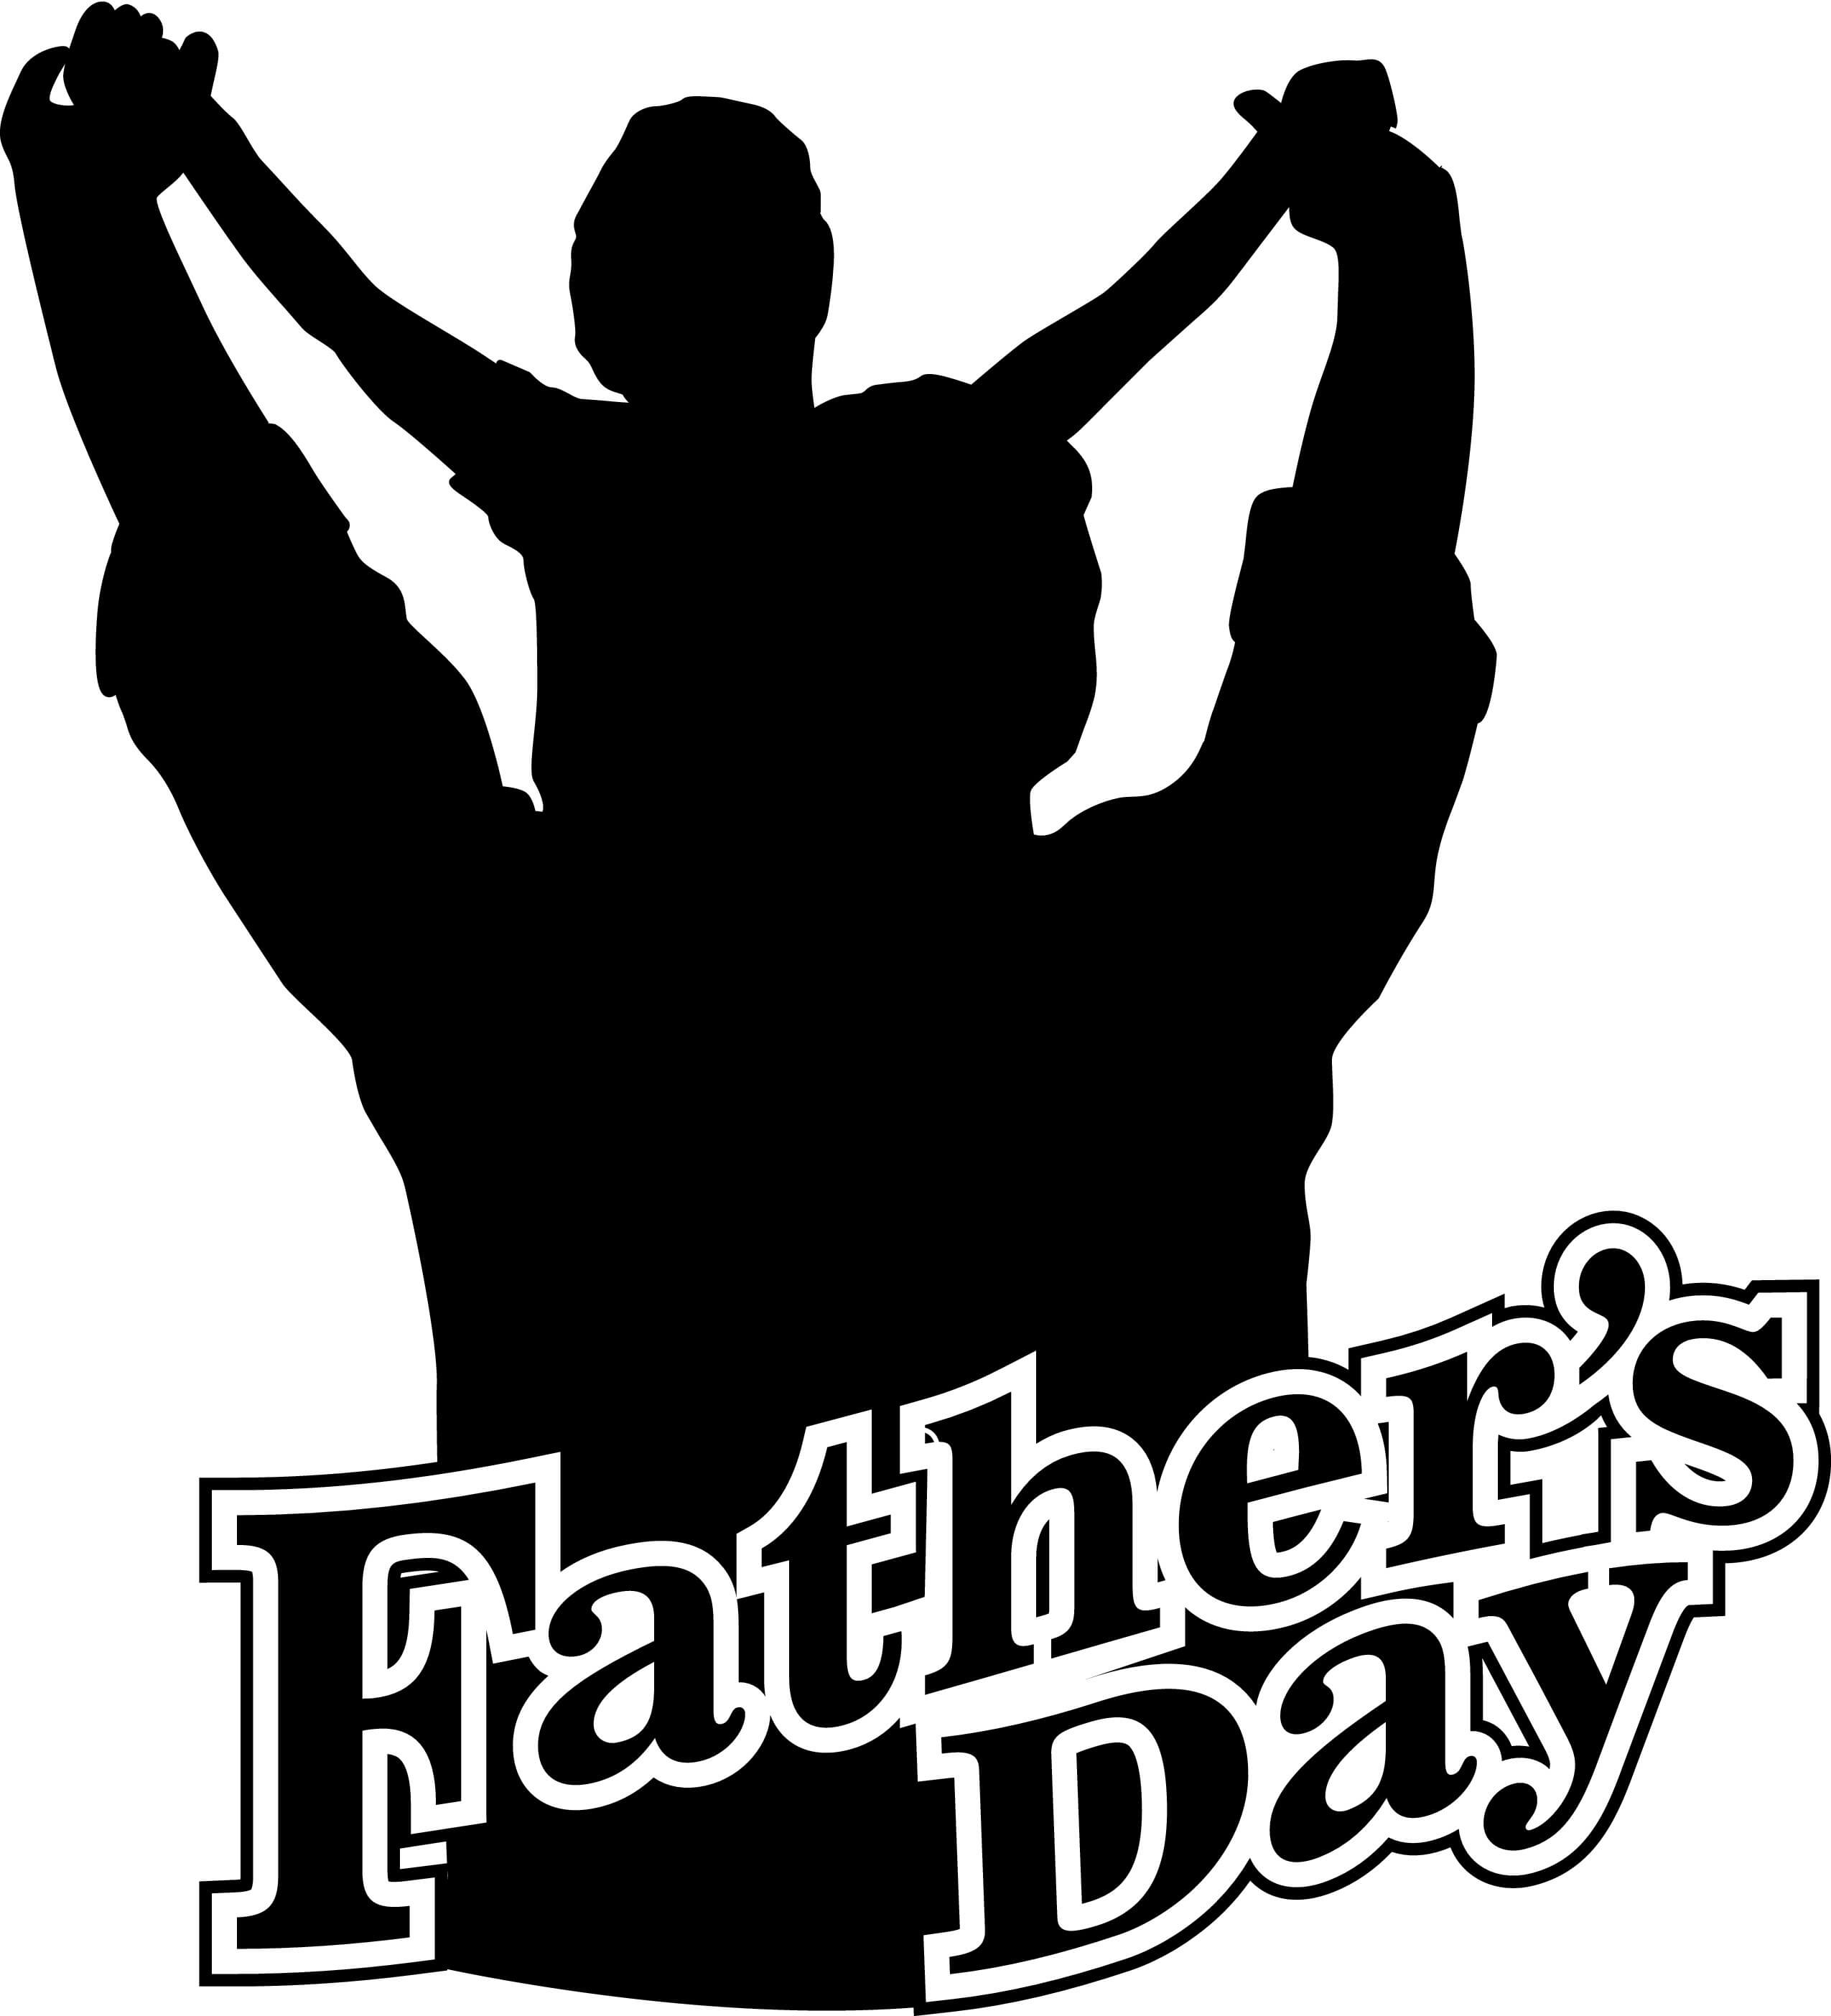 Happy Fathers Day Silhouette HD Wallpaper